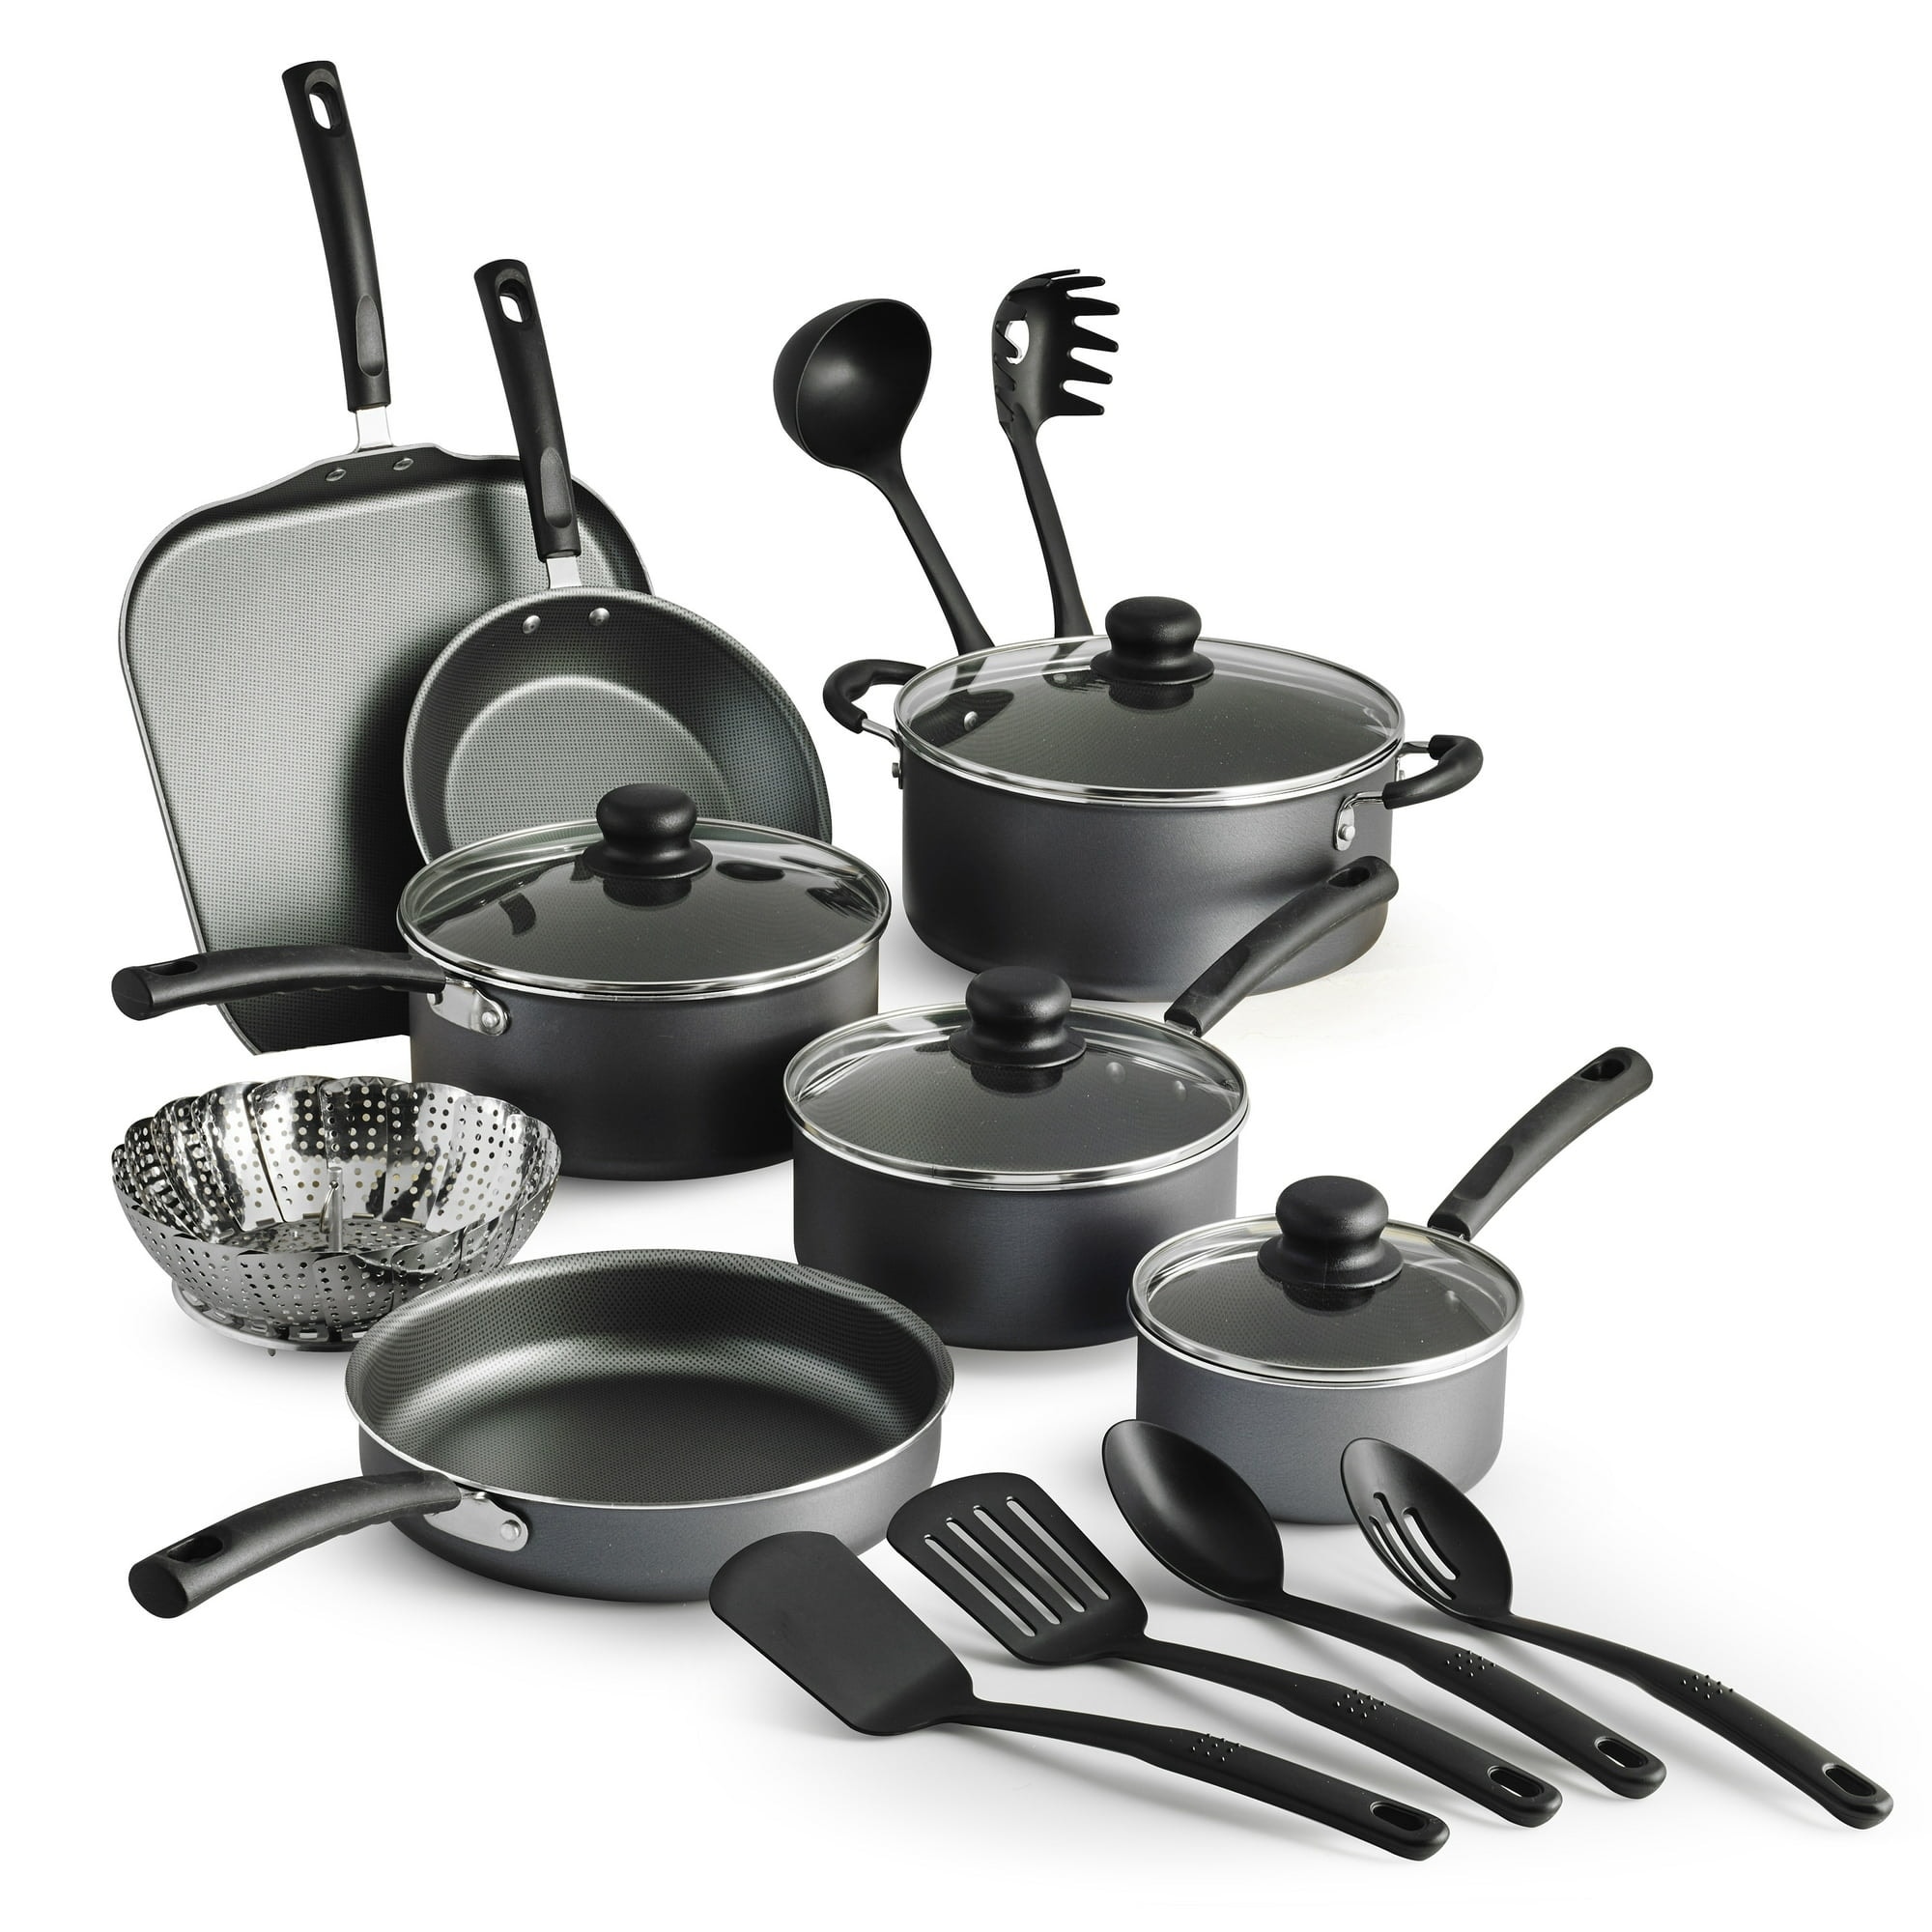 https://ak1.ostkcdn.com/images/products/is/images/direct/472341f11b947a0f6a43bc2f0099948ff080fef2/18-Piece-Non-stick-Cookware-Set.jpg